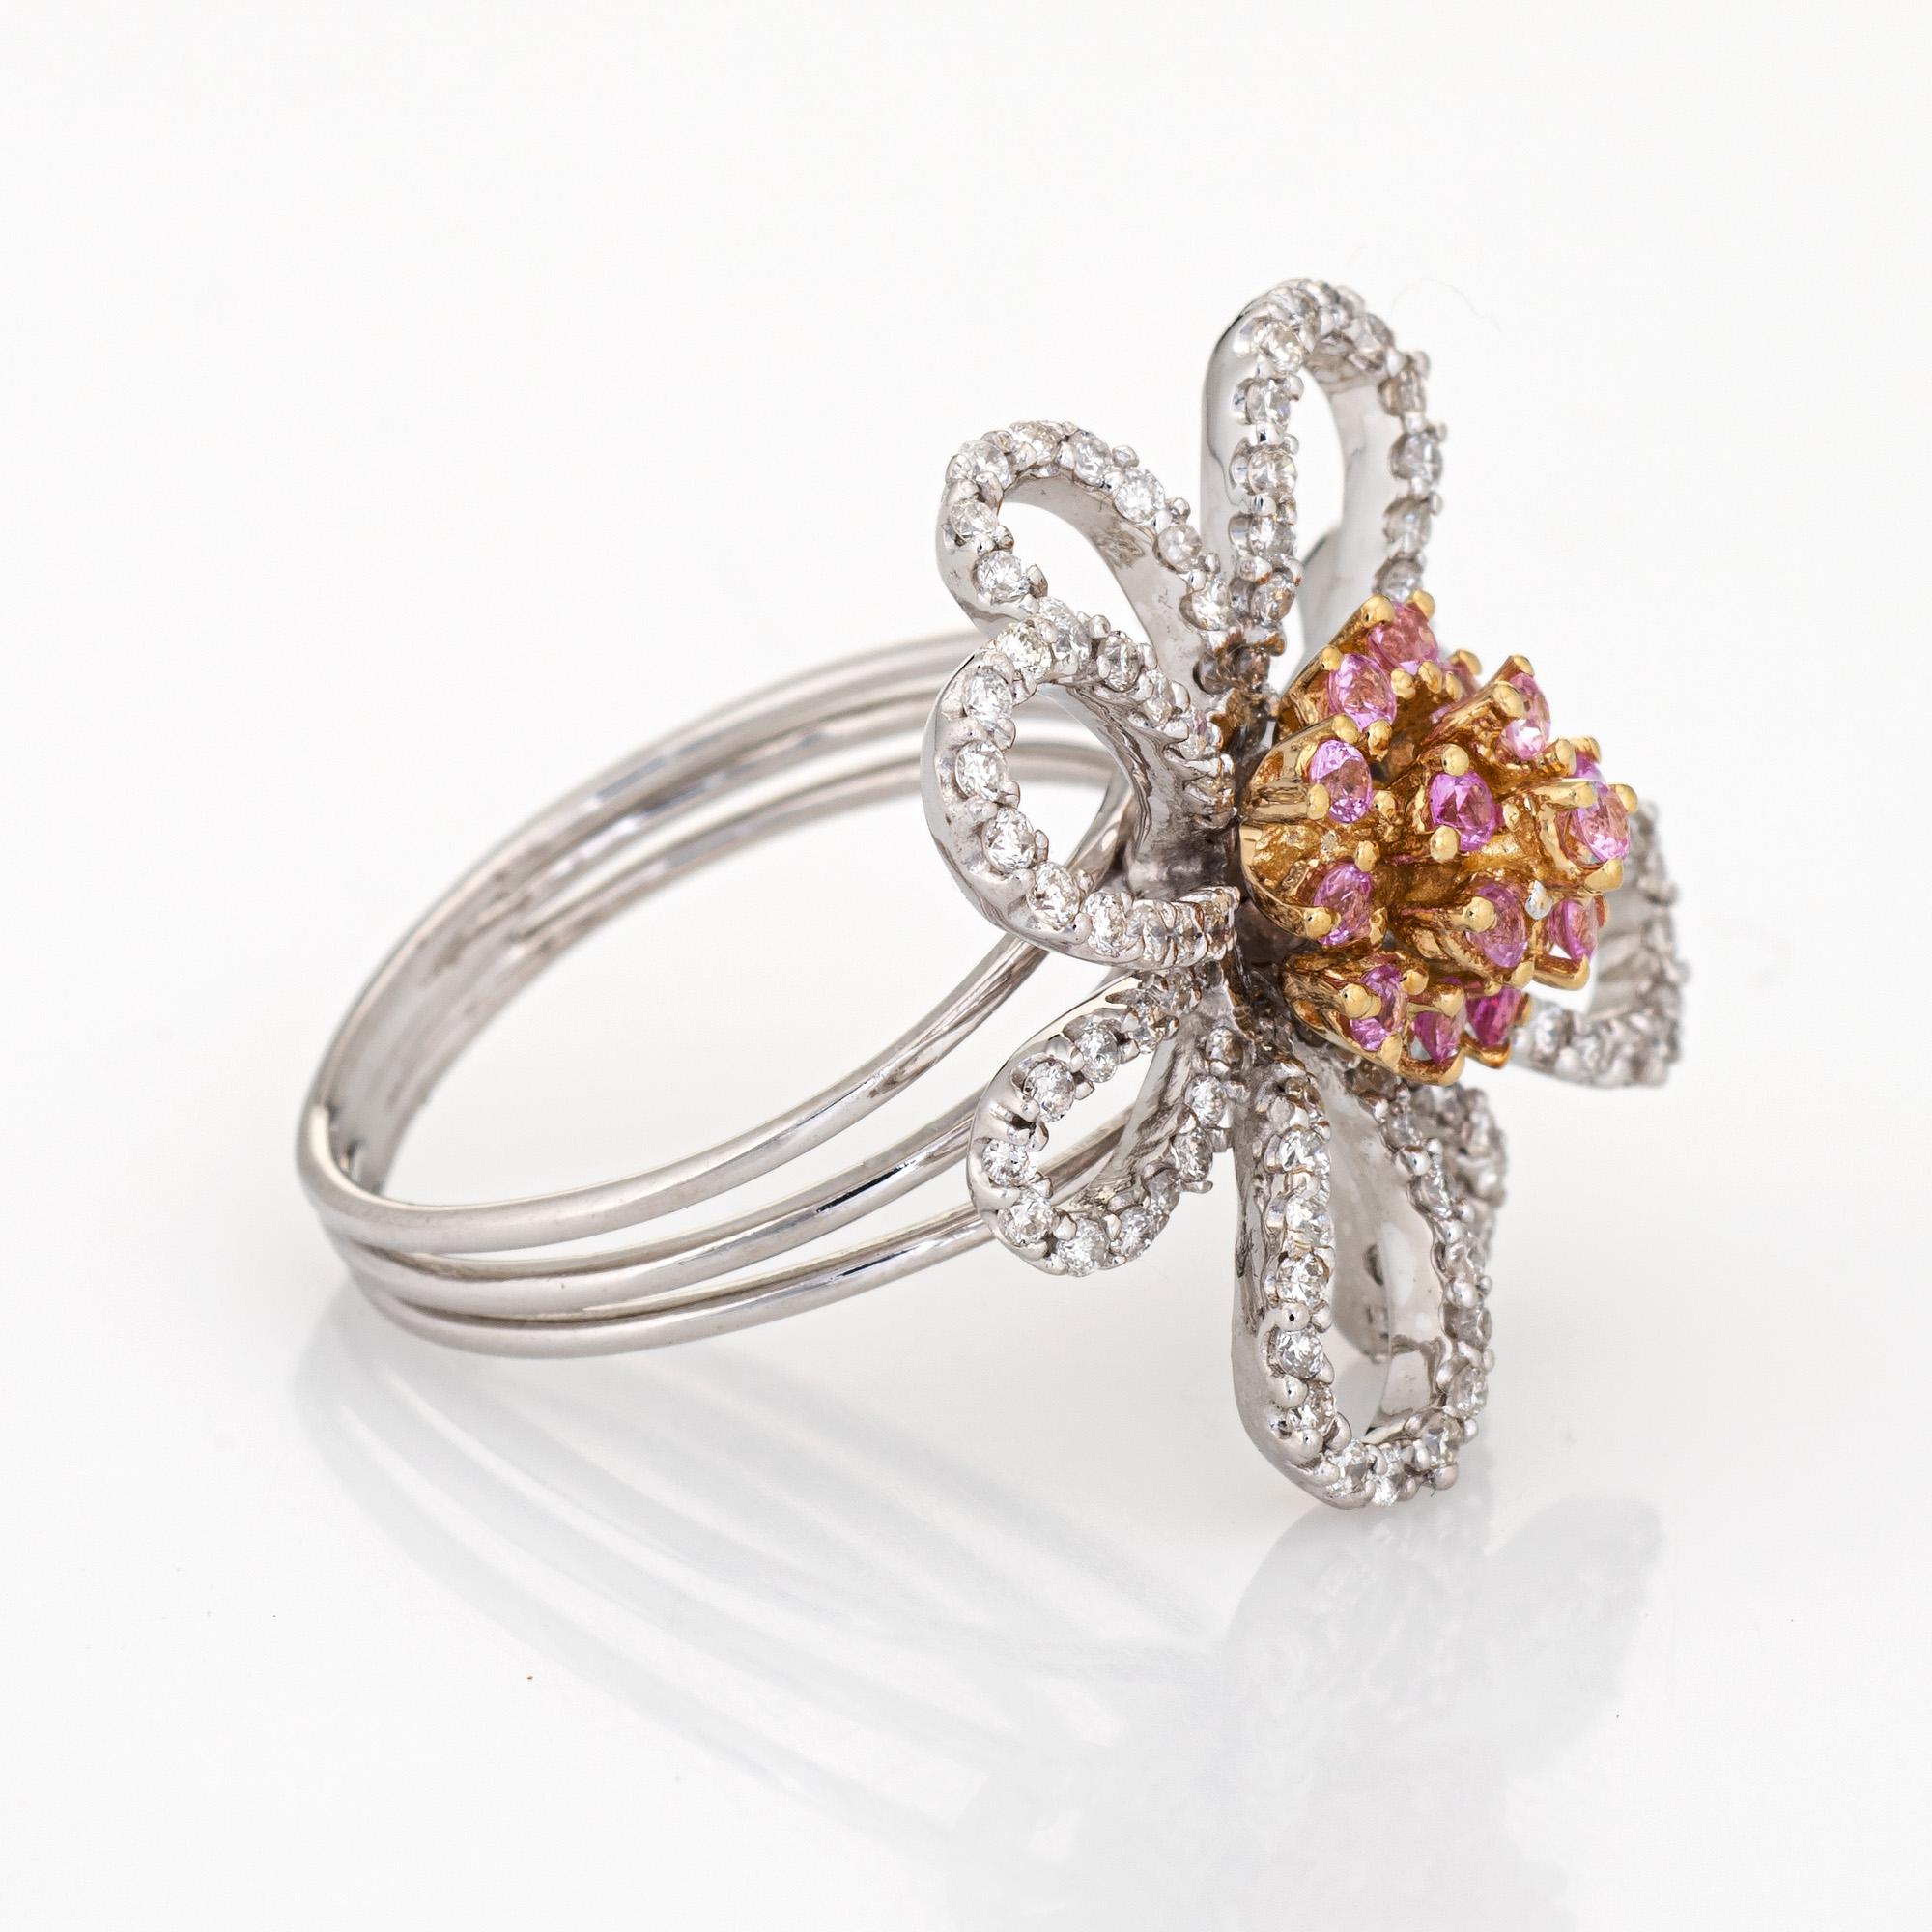 Contemporary Diamond Pink Topaz Flower Ring Estate 14k White Gold Cocktail Jewelry Sz 6.75  For Sale